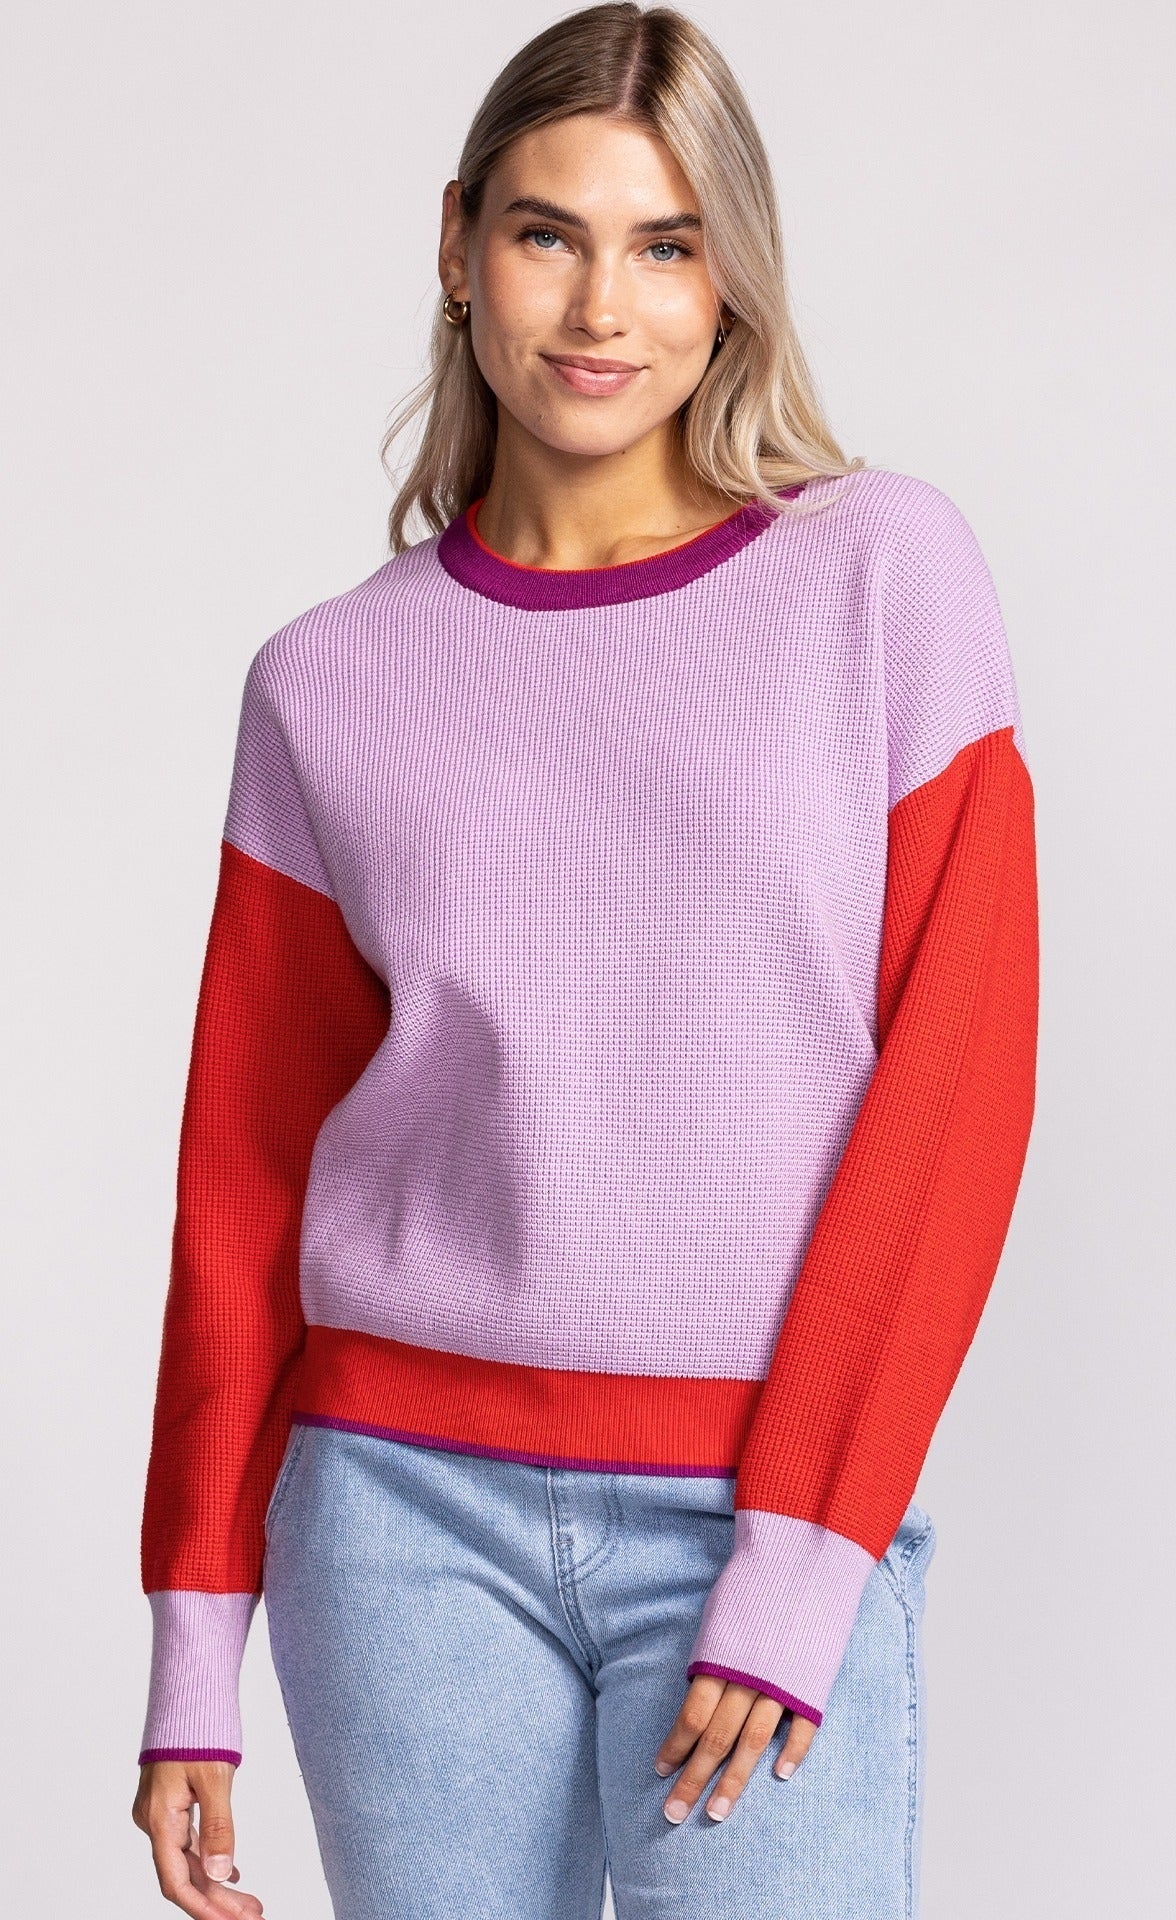 ANGELICA TOP - purple or grey mix